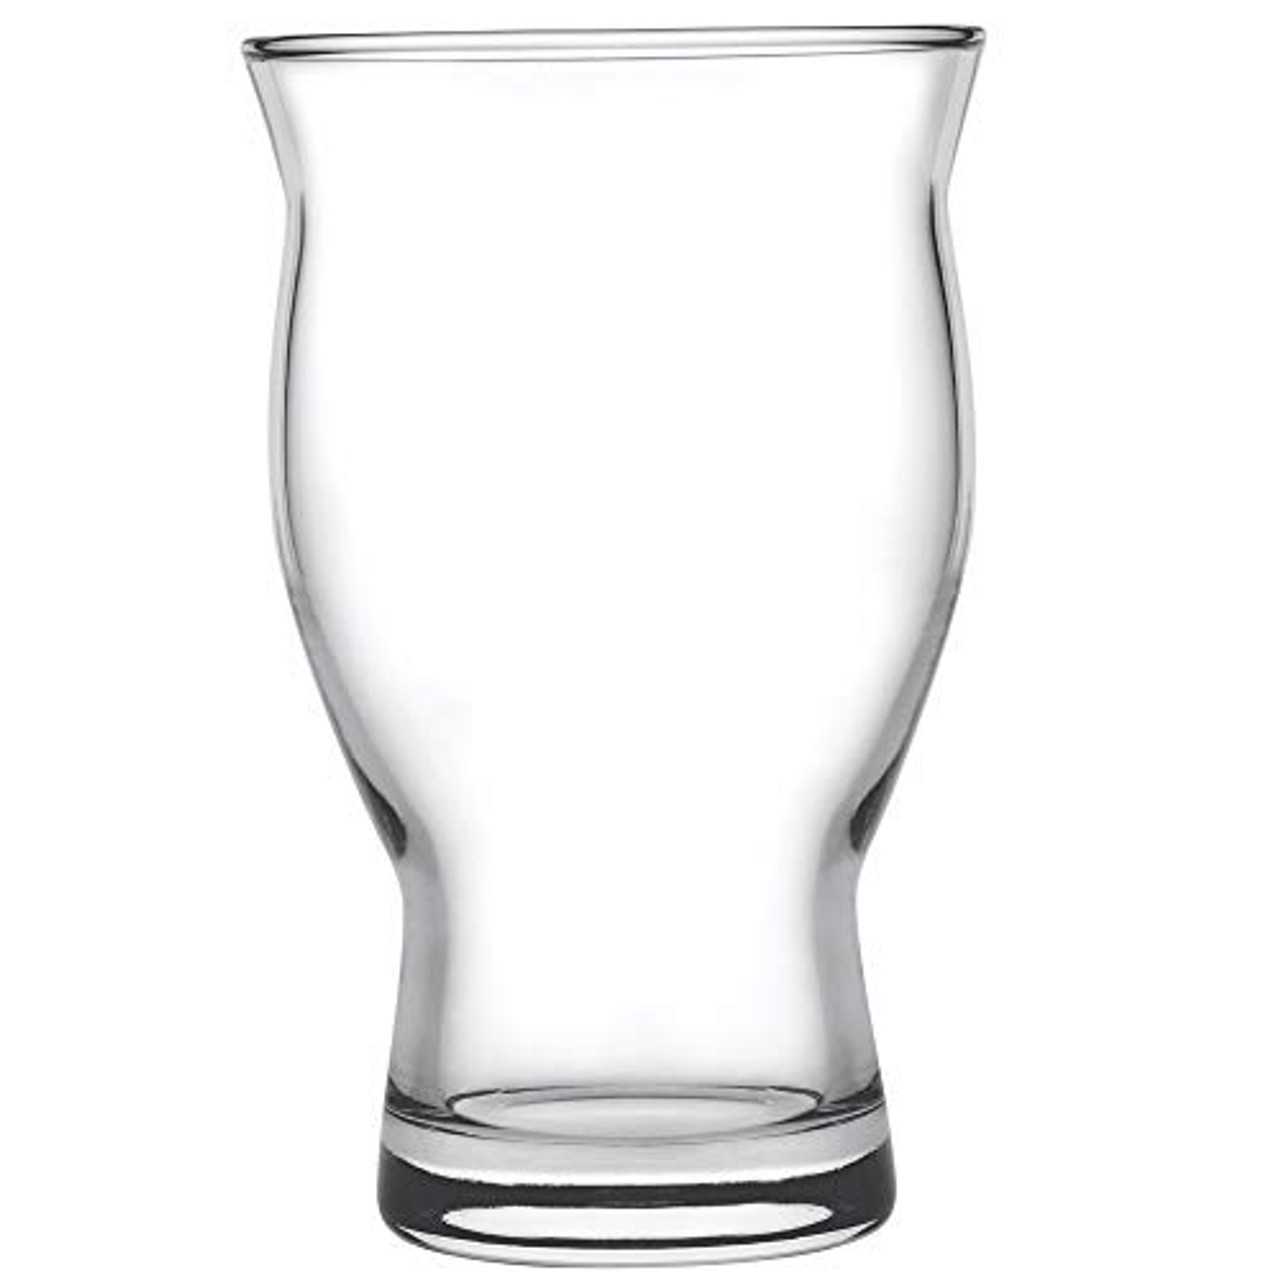 Libbey 1700 16 oz Tolenna Craft Beer Glass, Clear